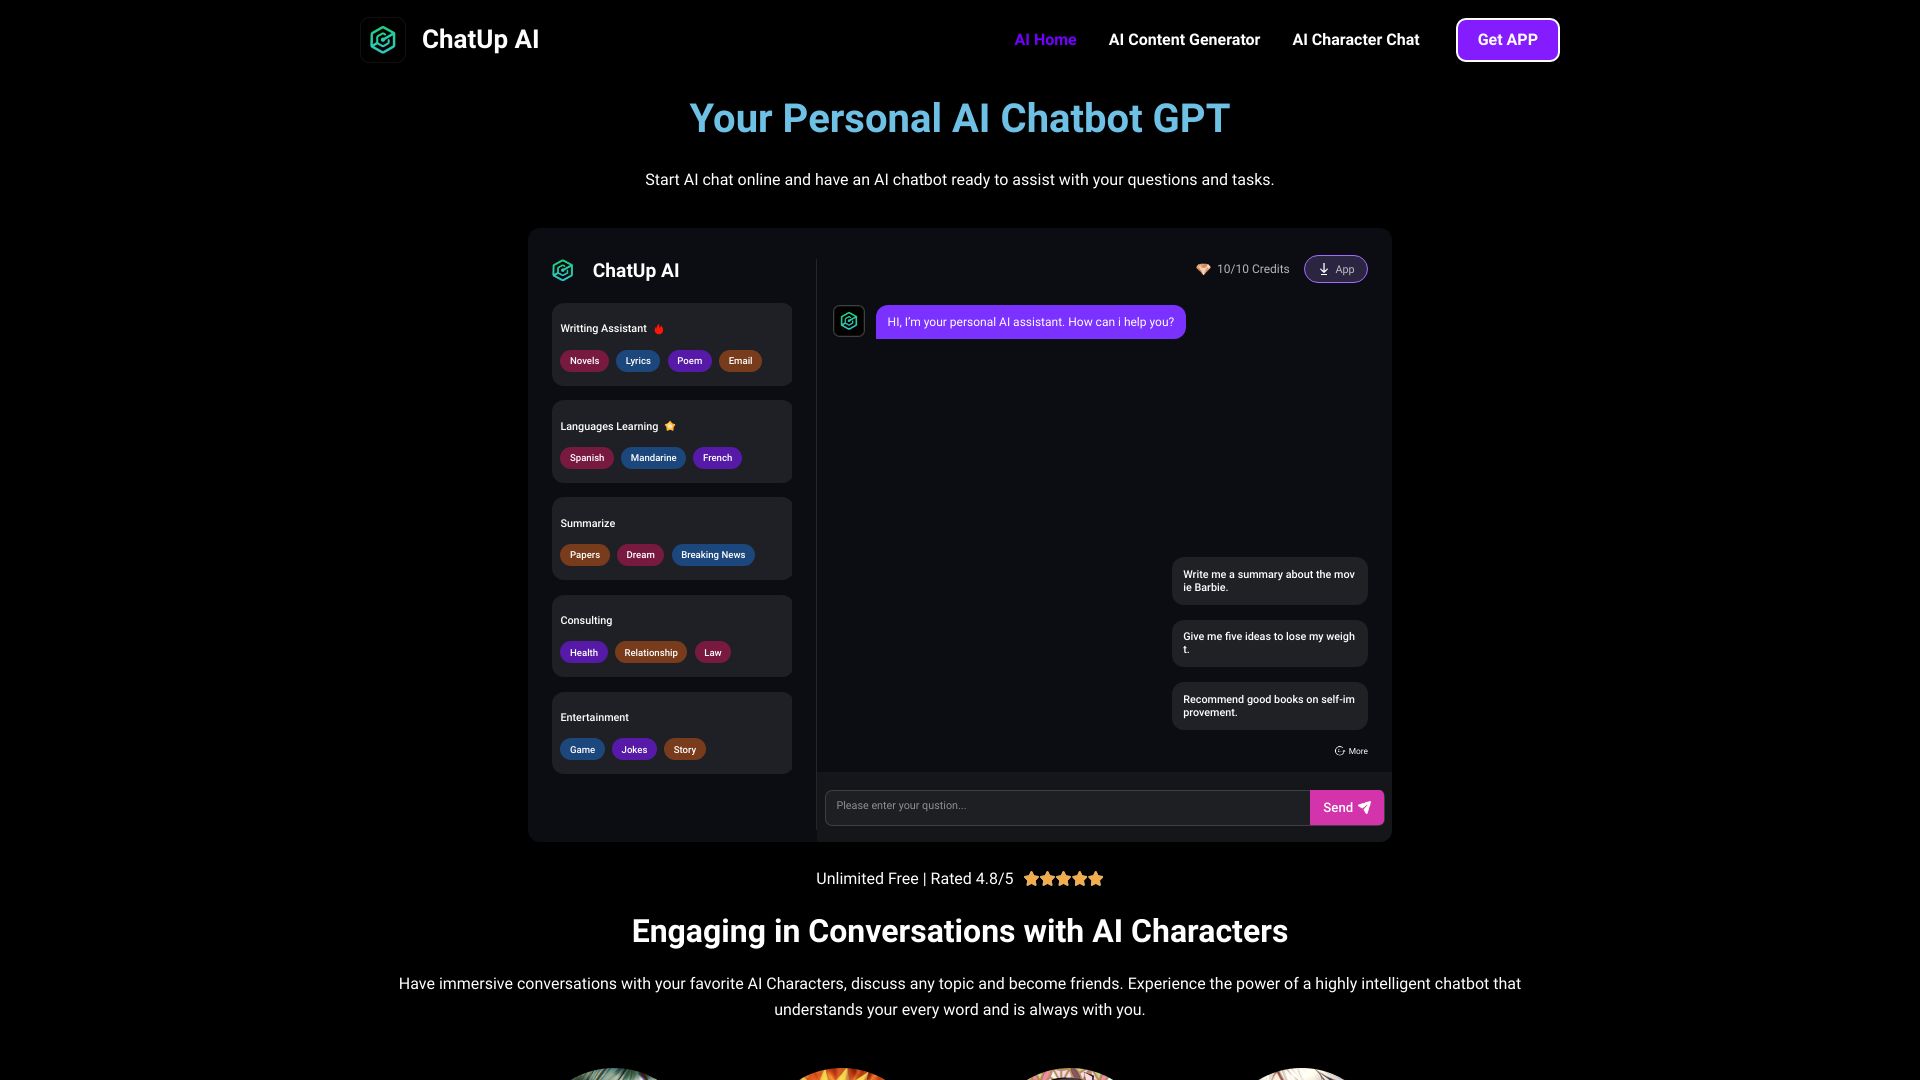 ChatUp AI - Personal AI Chatbot for Free